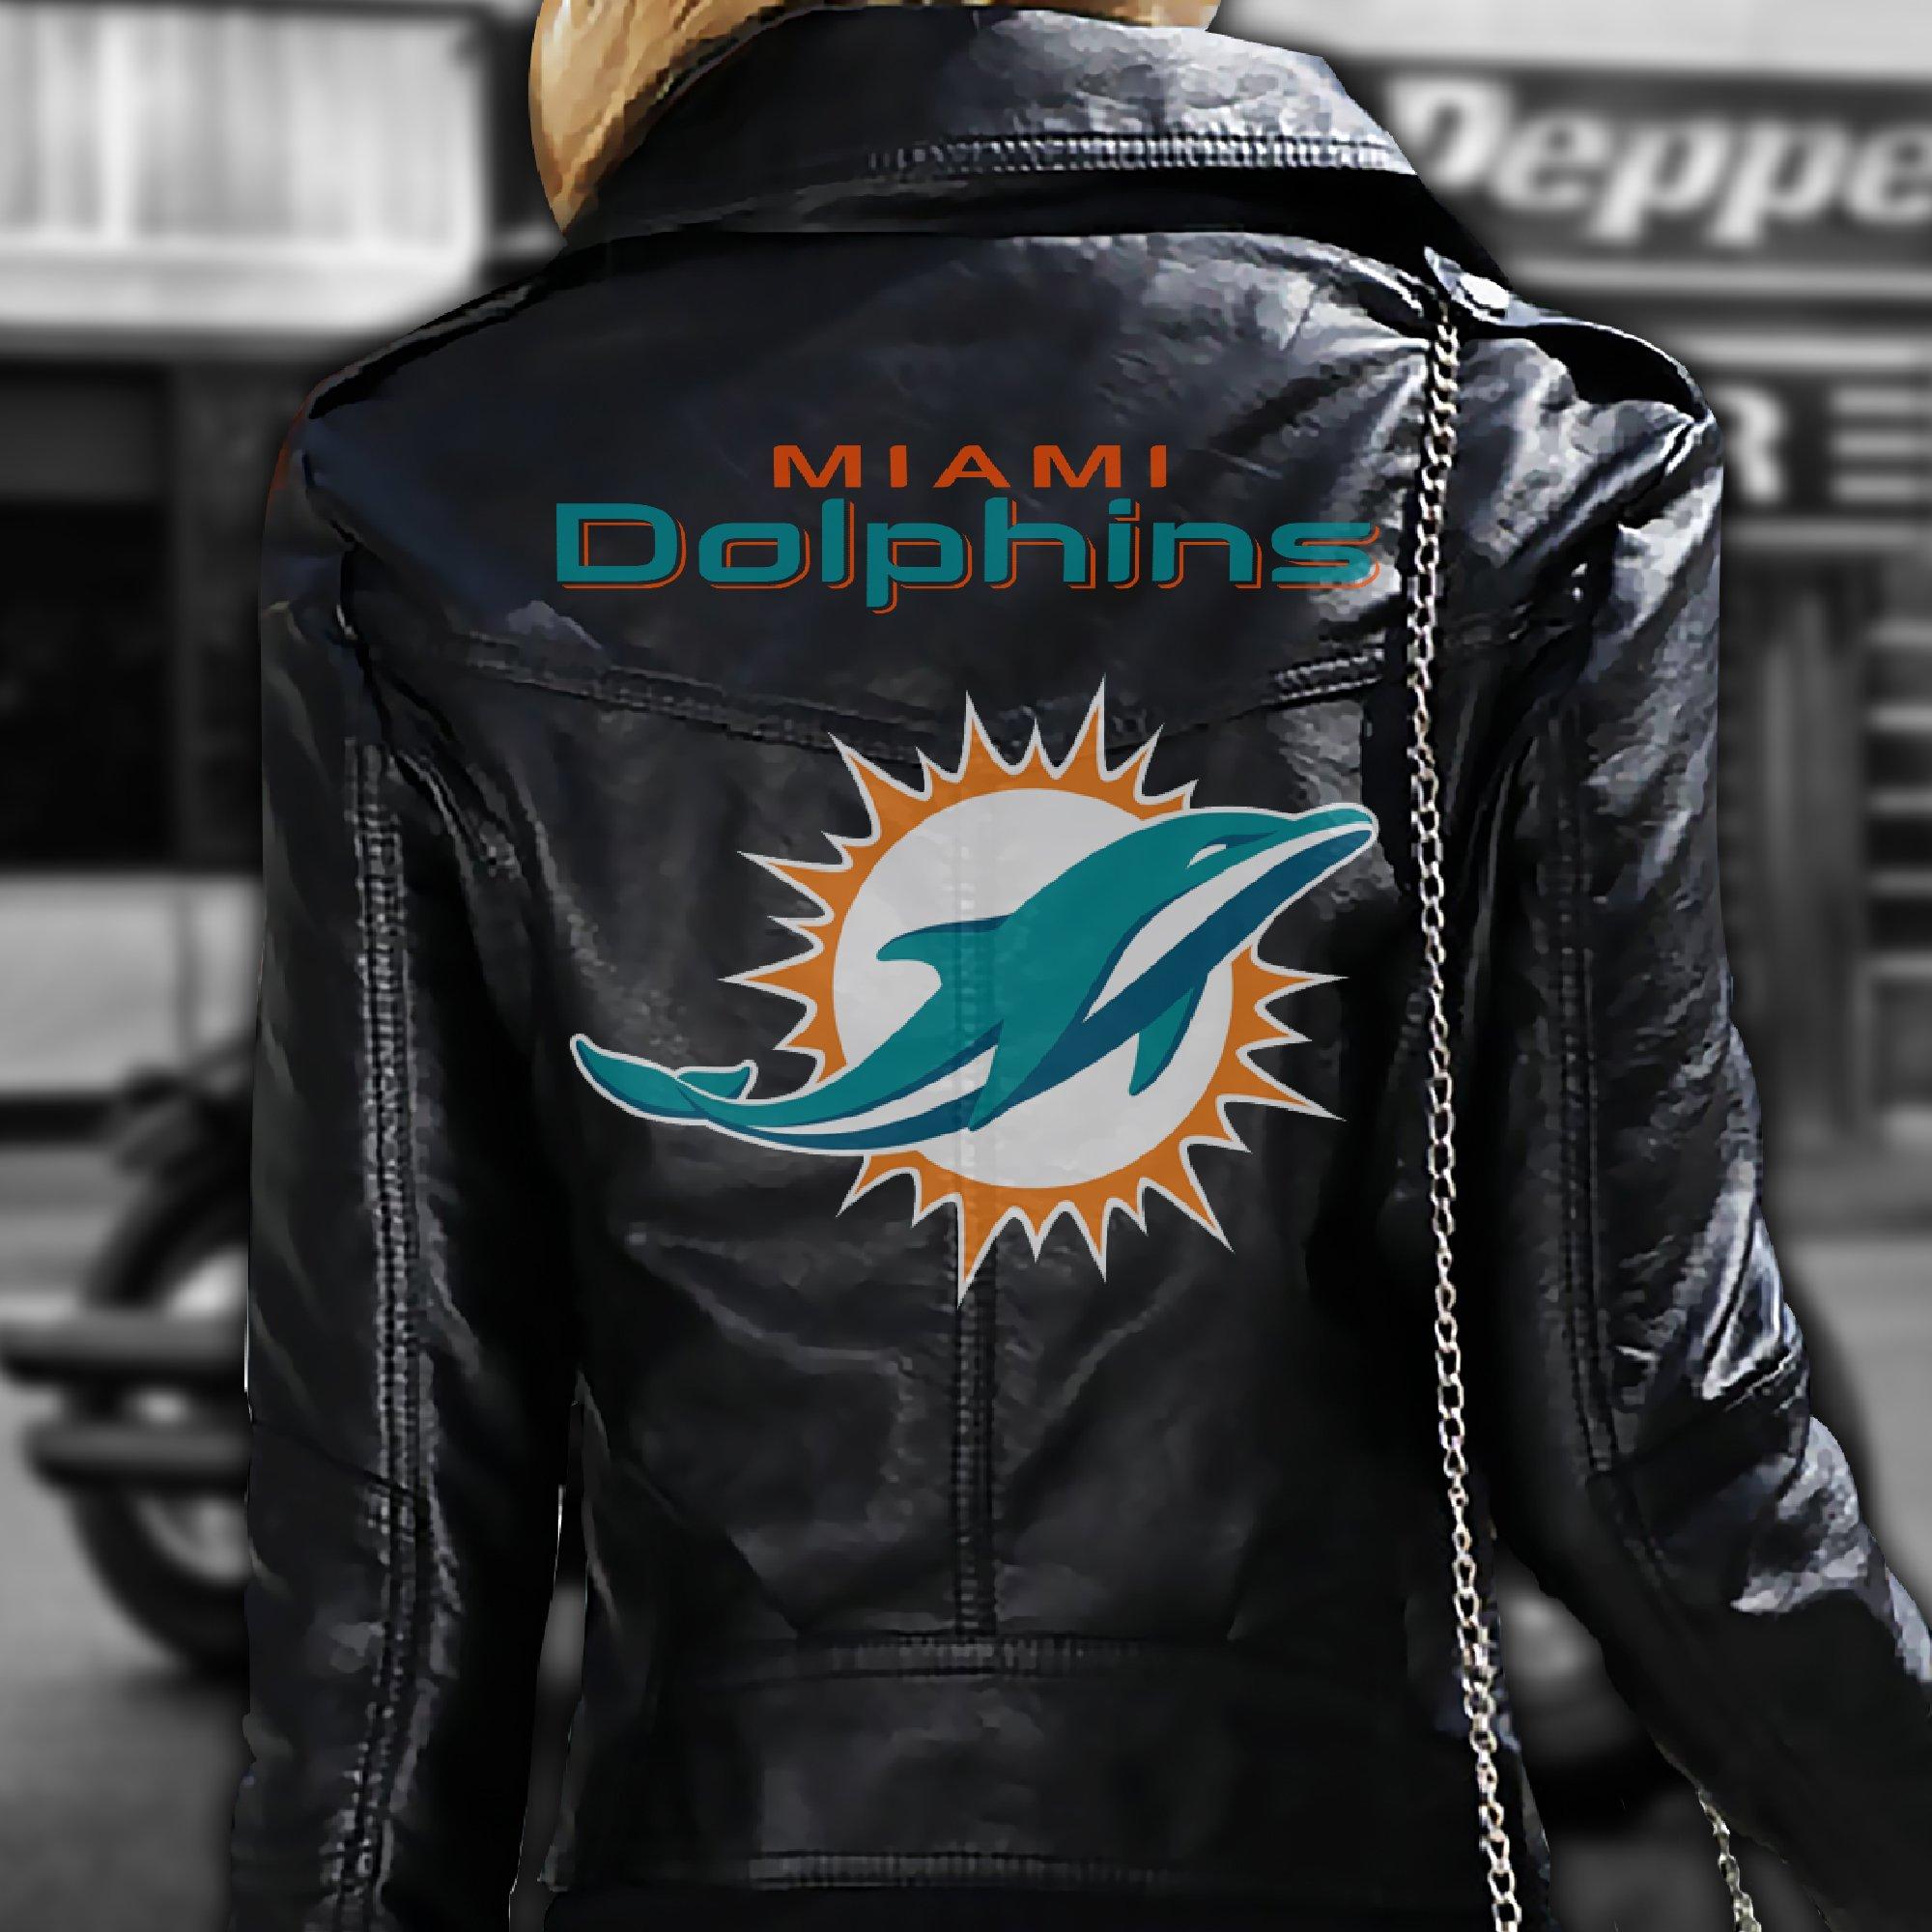 Miami Dolphins Nfl Football Black Leather Jacket Sport Leather